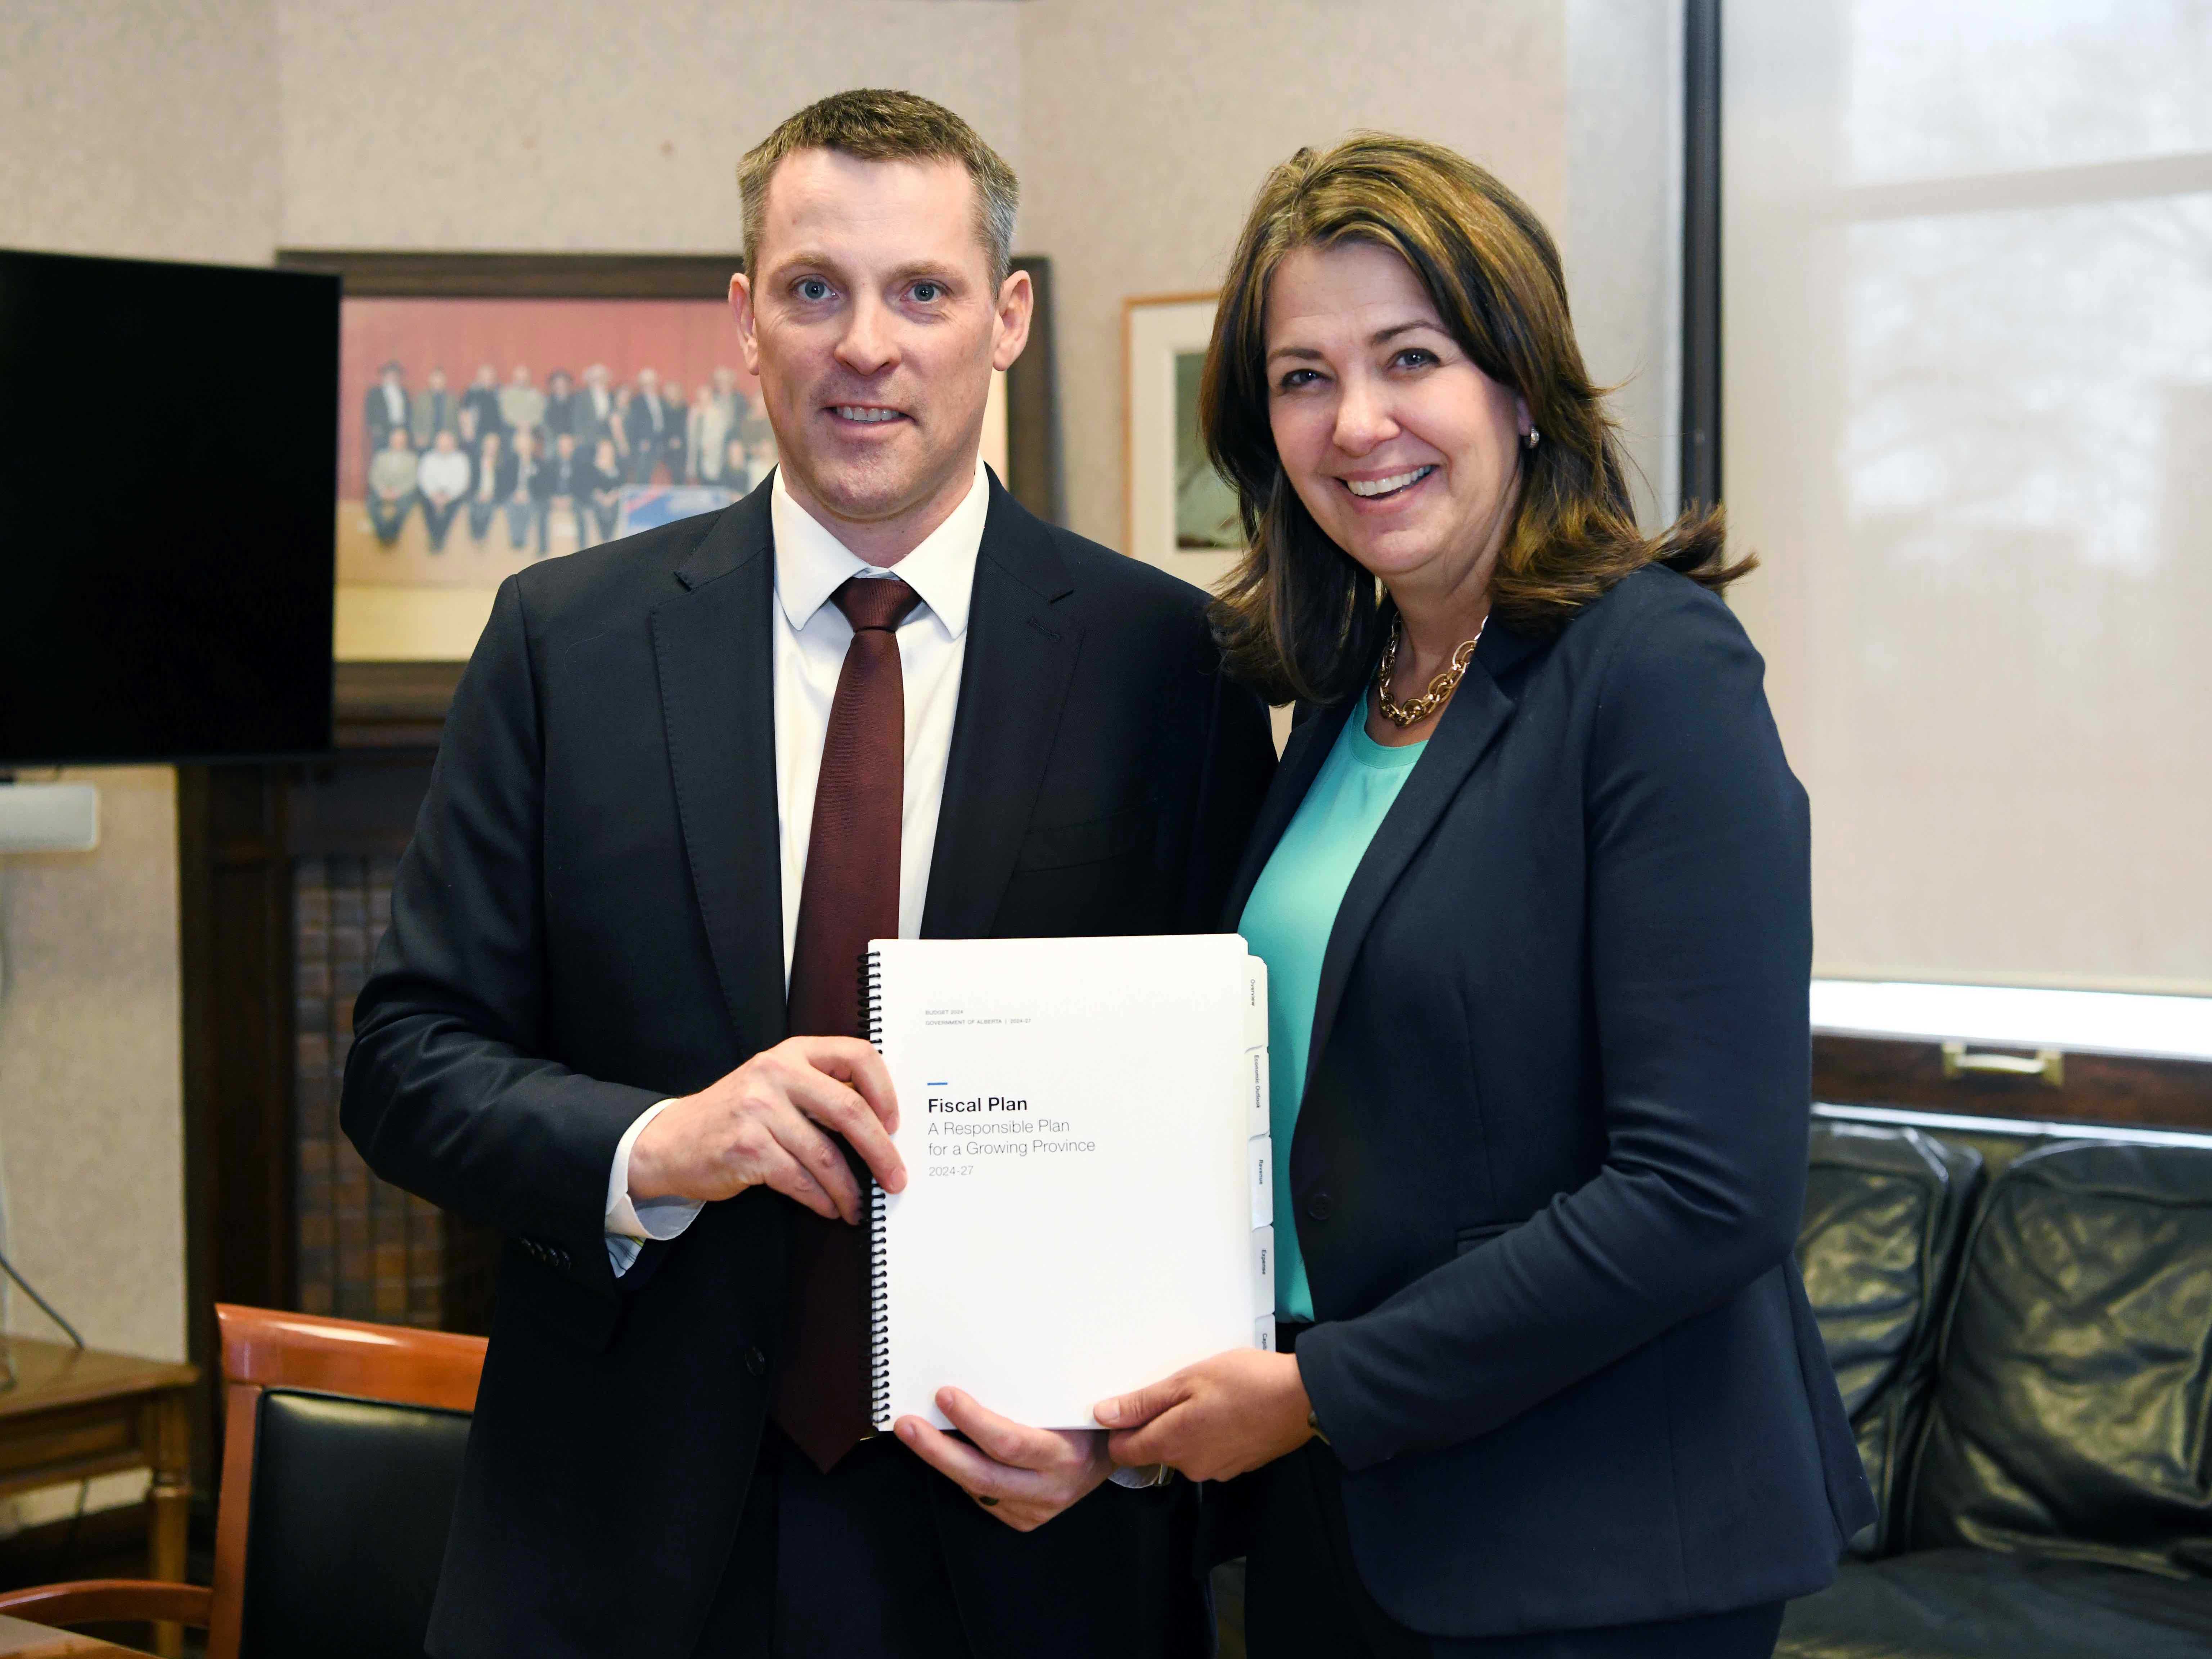 A light-skinned man with short brown hair in a dark suit and white shirt stands beside a smiling light-skinned woman with shoulder-length dark hair in a blue suit. They’re holding a document that reads: “Fiscal Plan: A Responsible Plan for a Growing Province.”